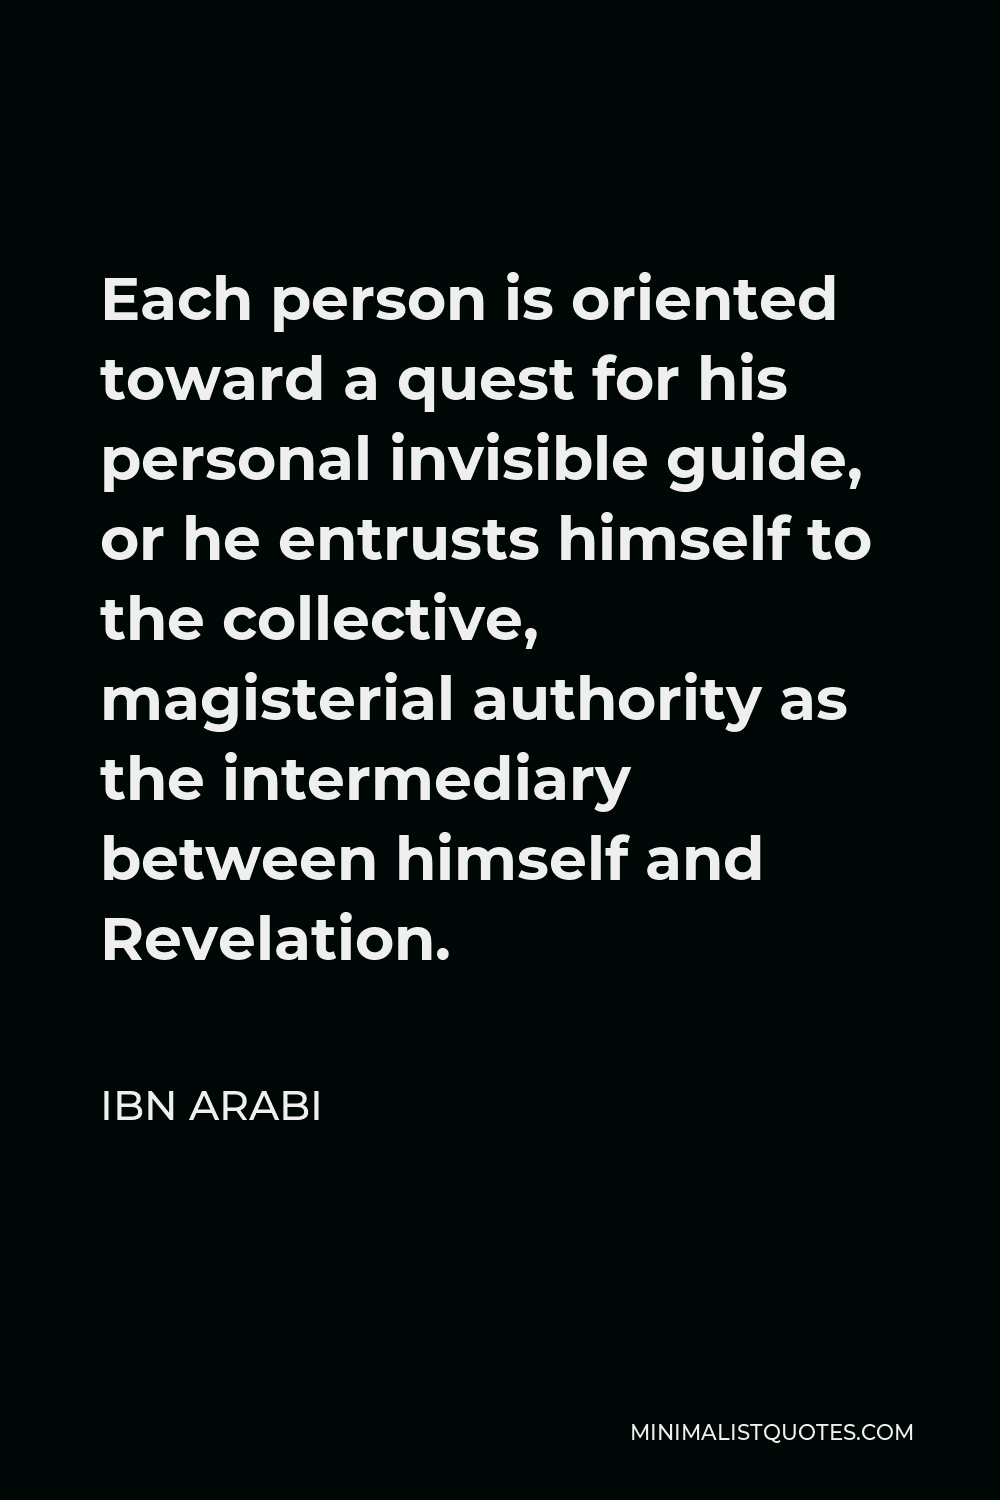 Ibn Arabi Quote - Each person is oriented toward a quest for his personal invisible guide, or he entrusts himself to the collective, magisterial authority as the intermediary between himself and Revelation.